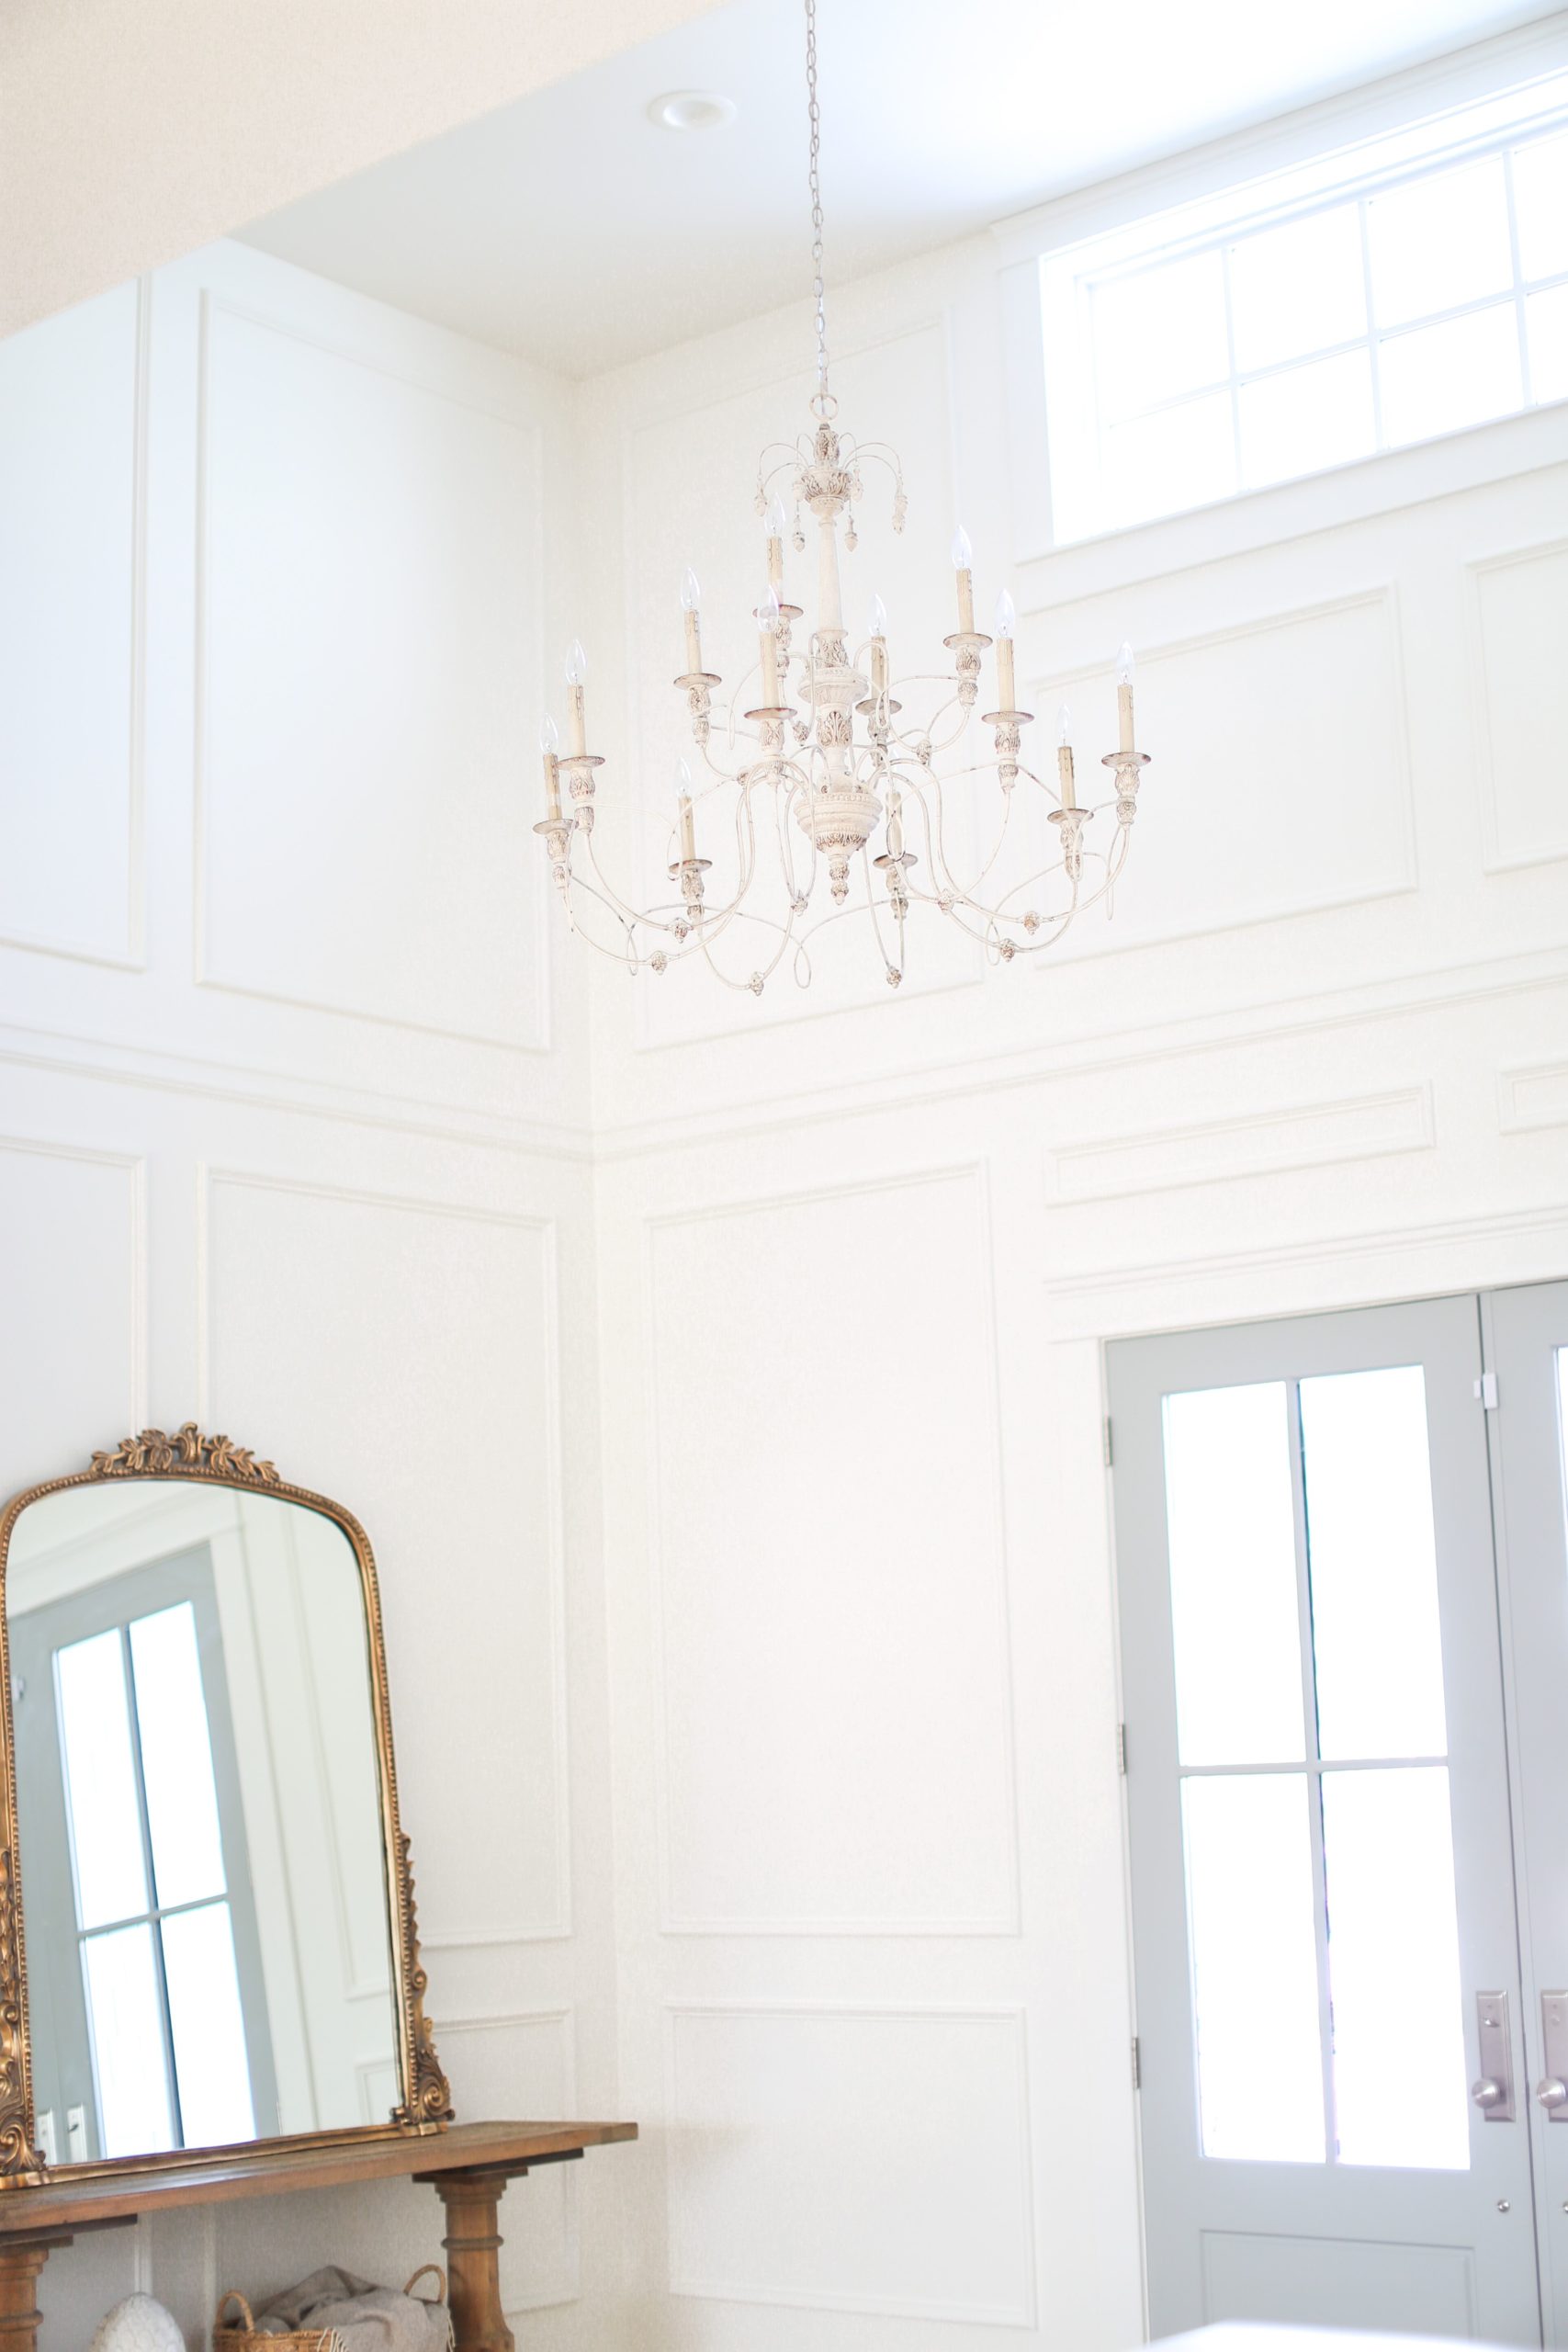 Tori Wesszer from Fraiche Living Entryway with oversized chandelier, Anthropologie Mirror and Moulding from Metrie